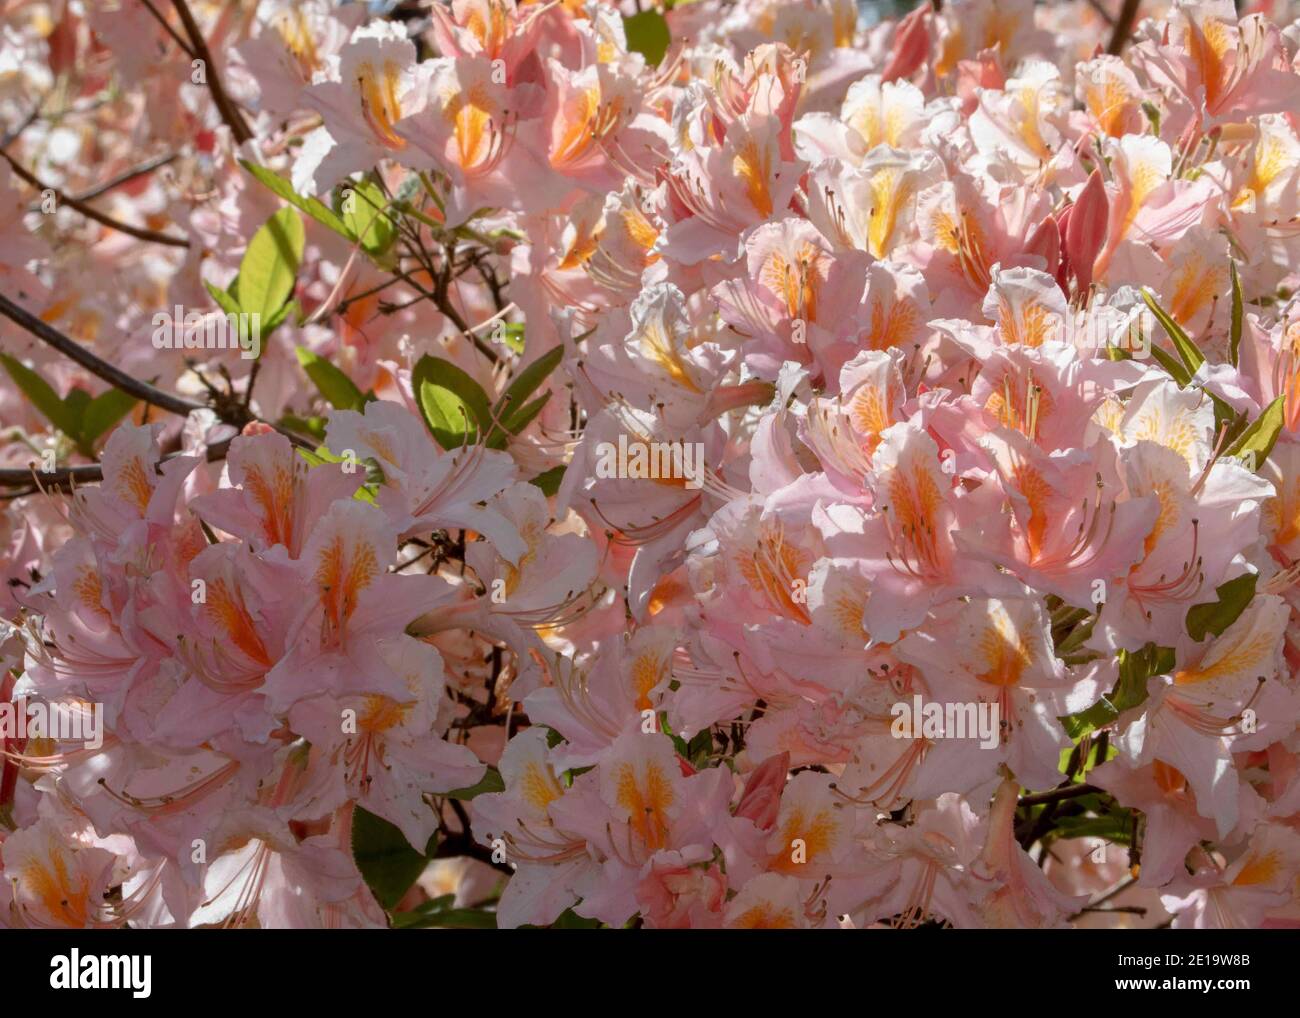 the rhododendron which symbolizes danger and to beware Stock Photo